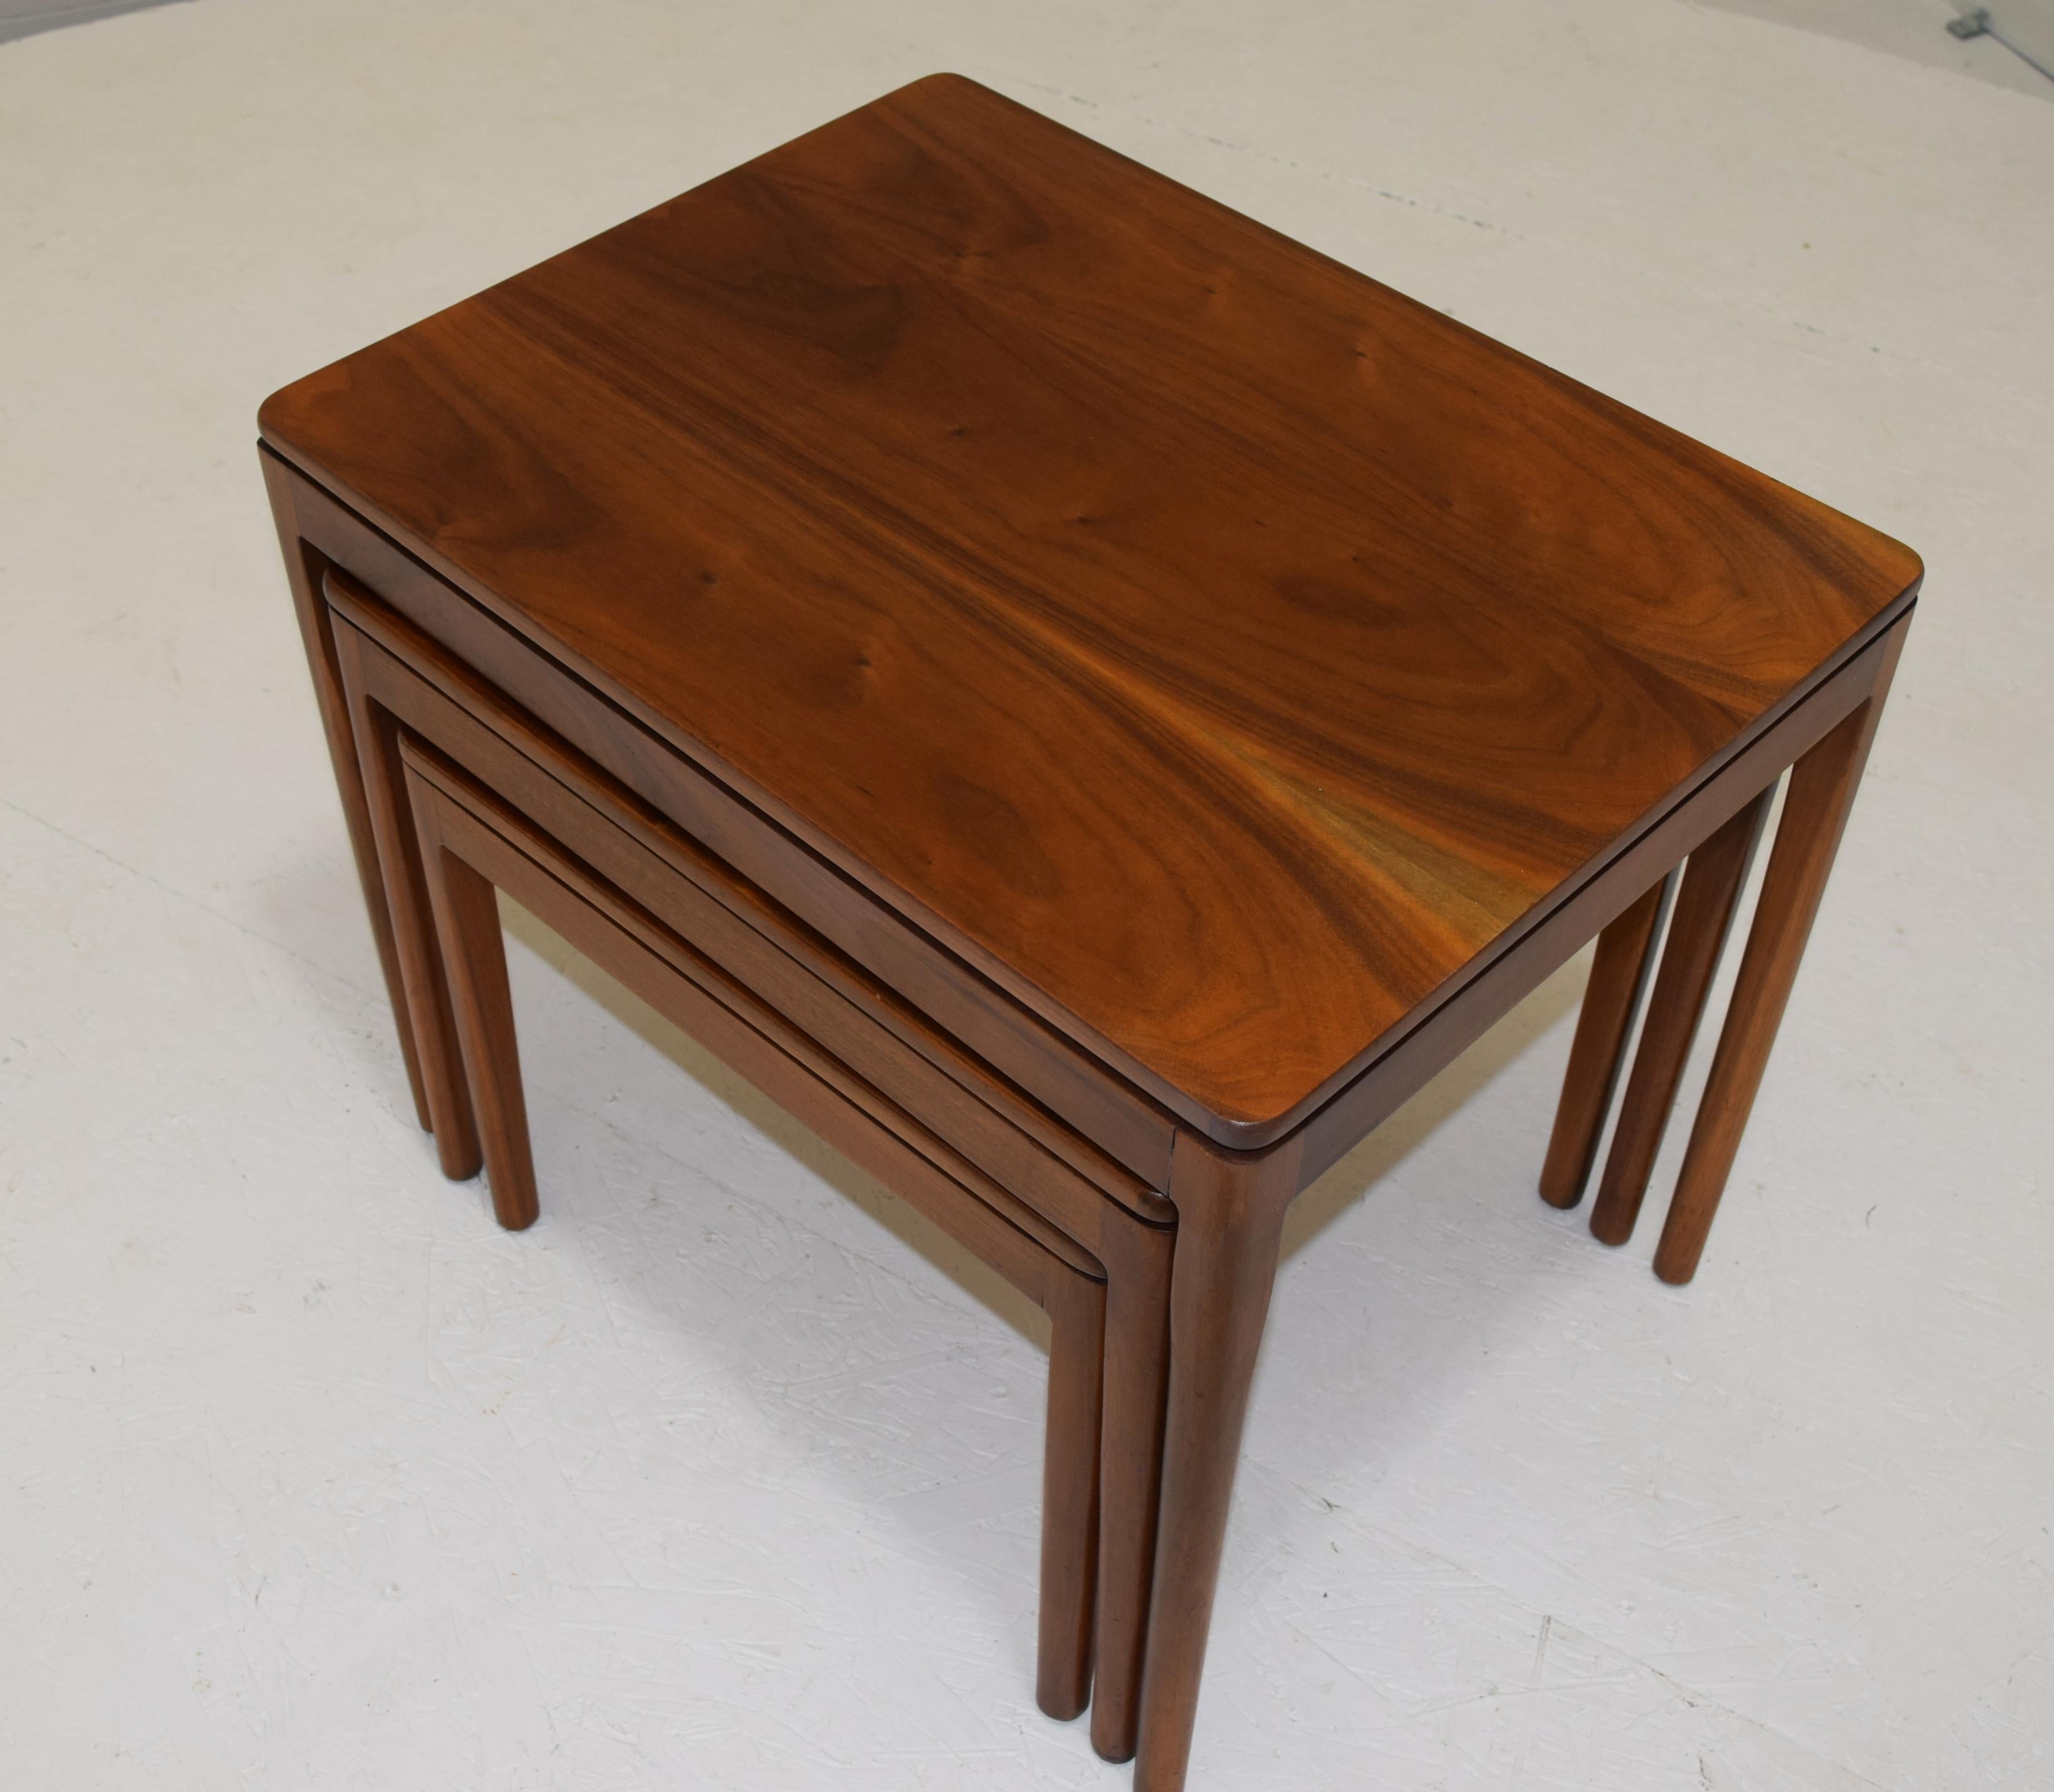 Mid-20th Century Refinished Set of 3 Nesting Tables in Walnut by Drexel